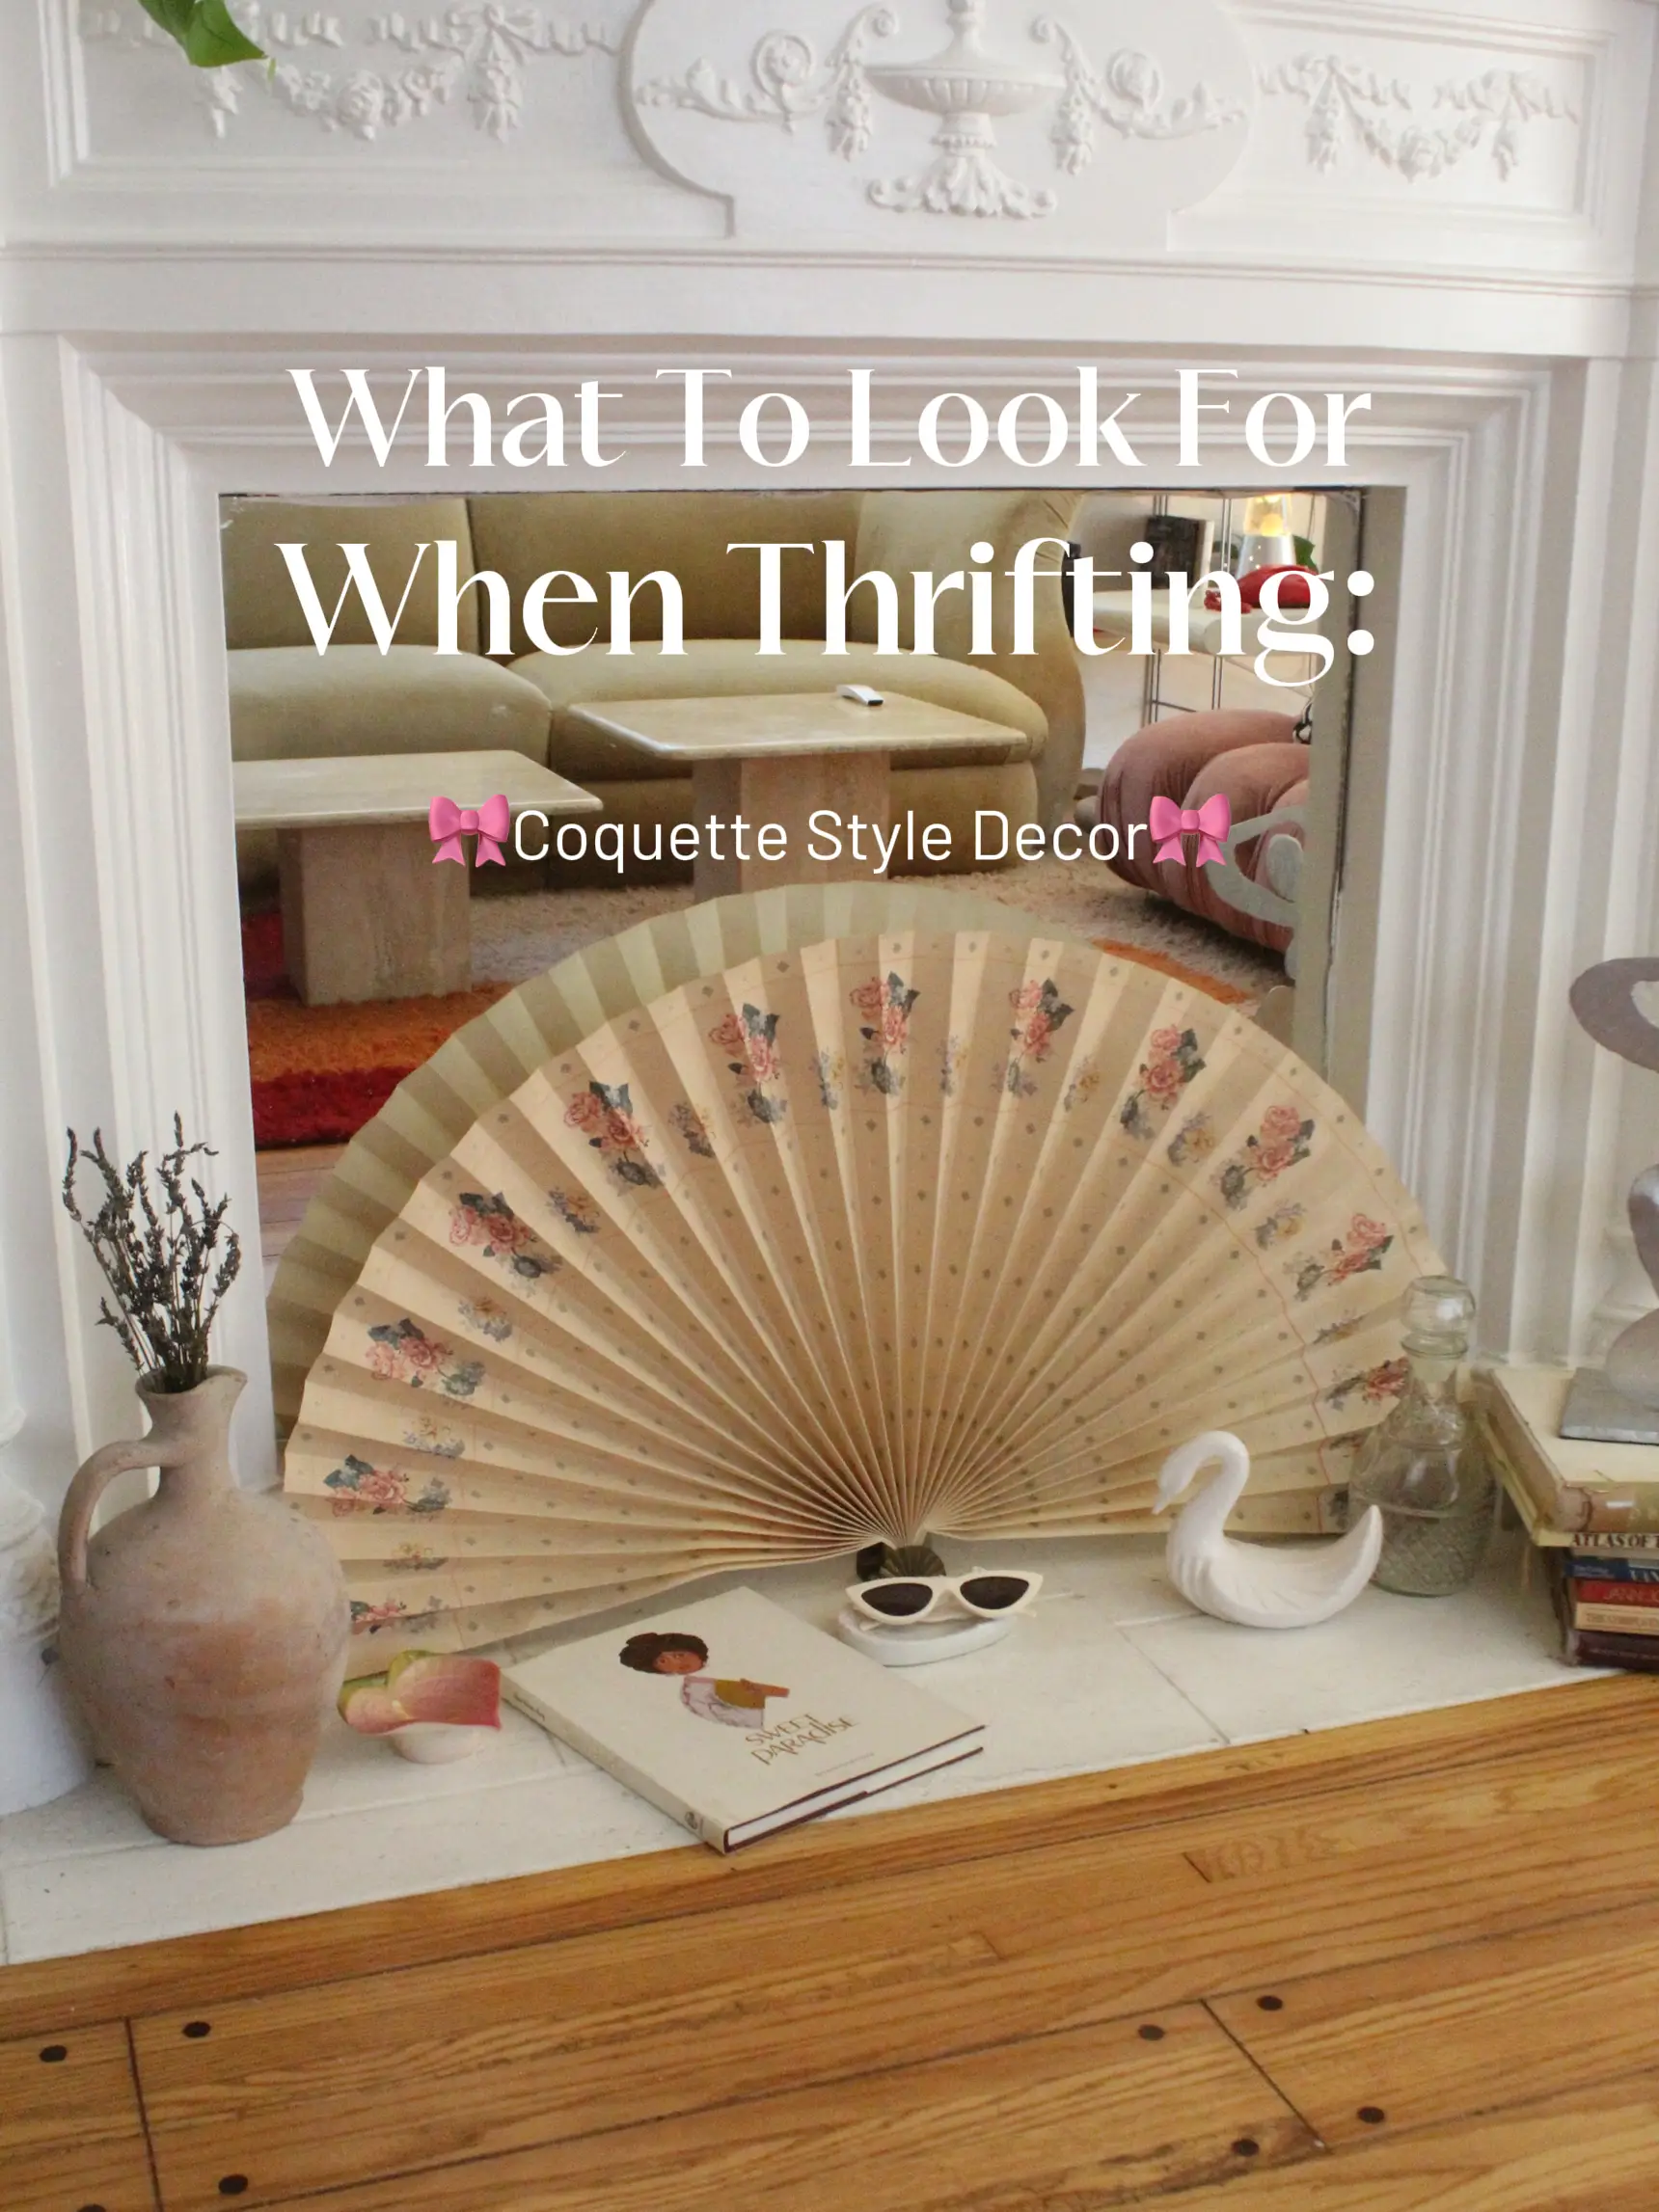 How to Thrift: Coquette Style Decor 🎀